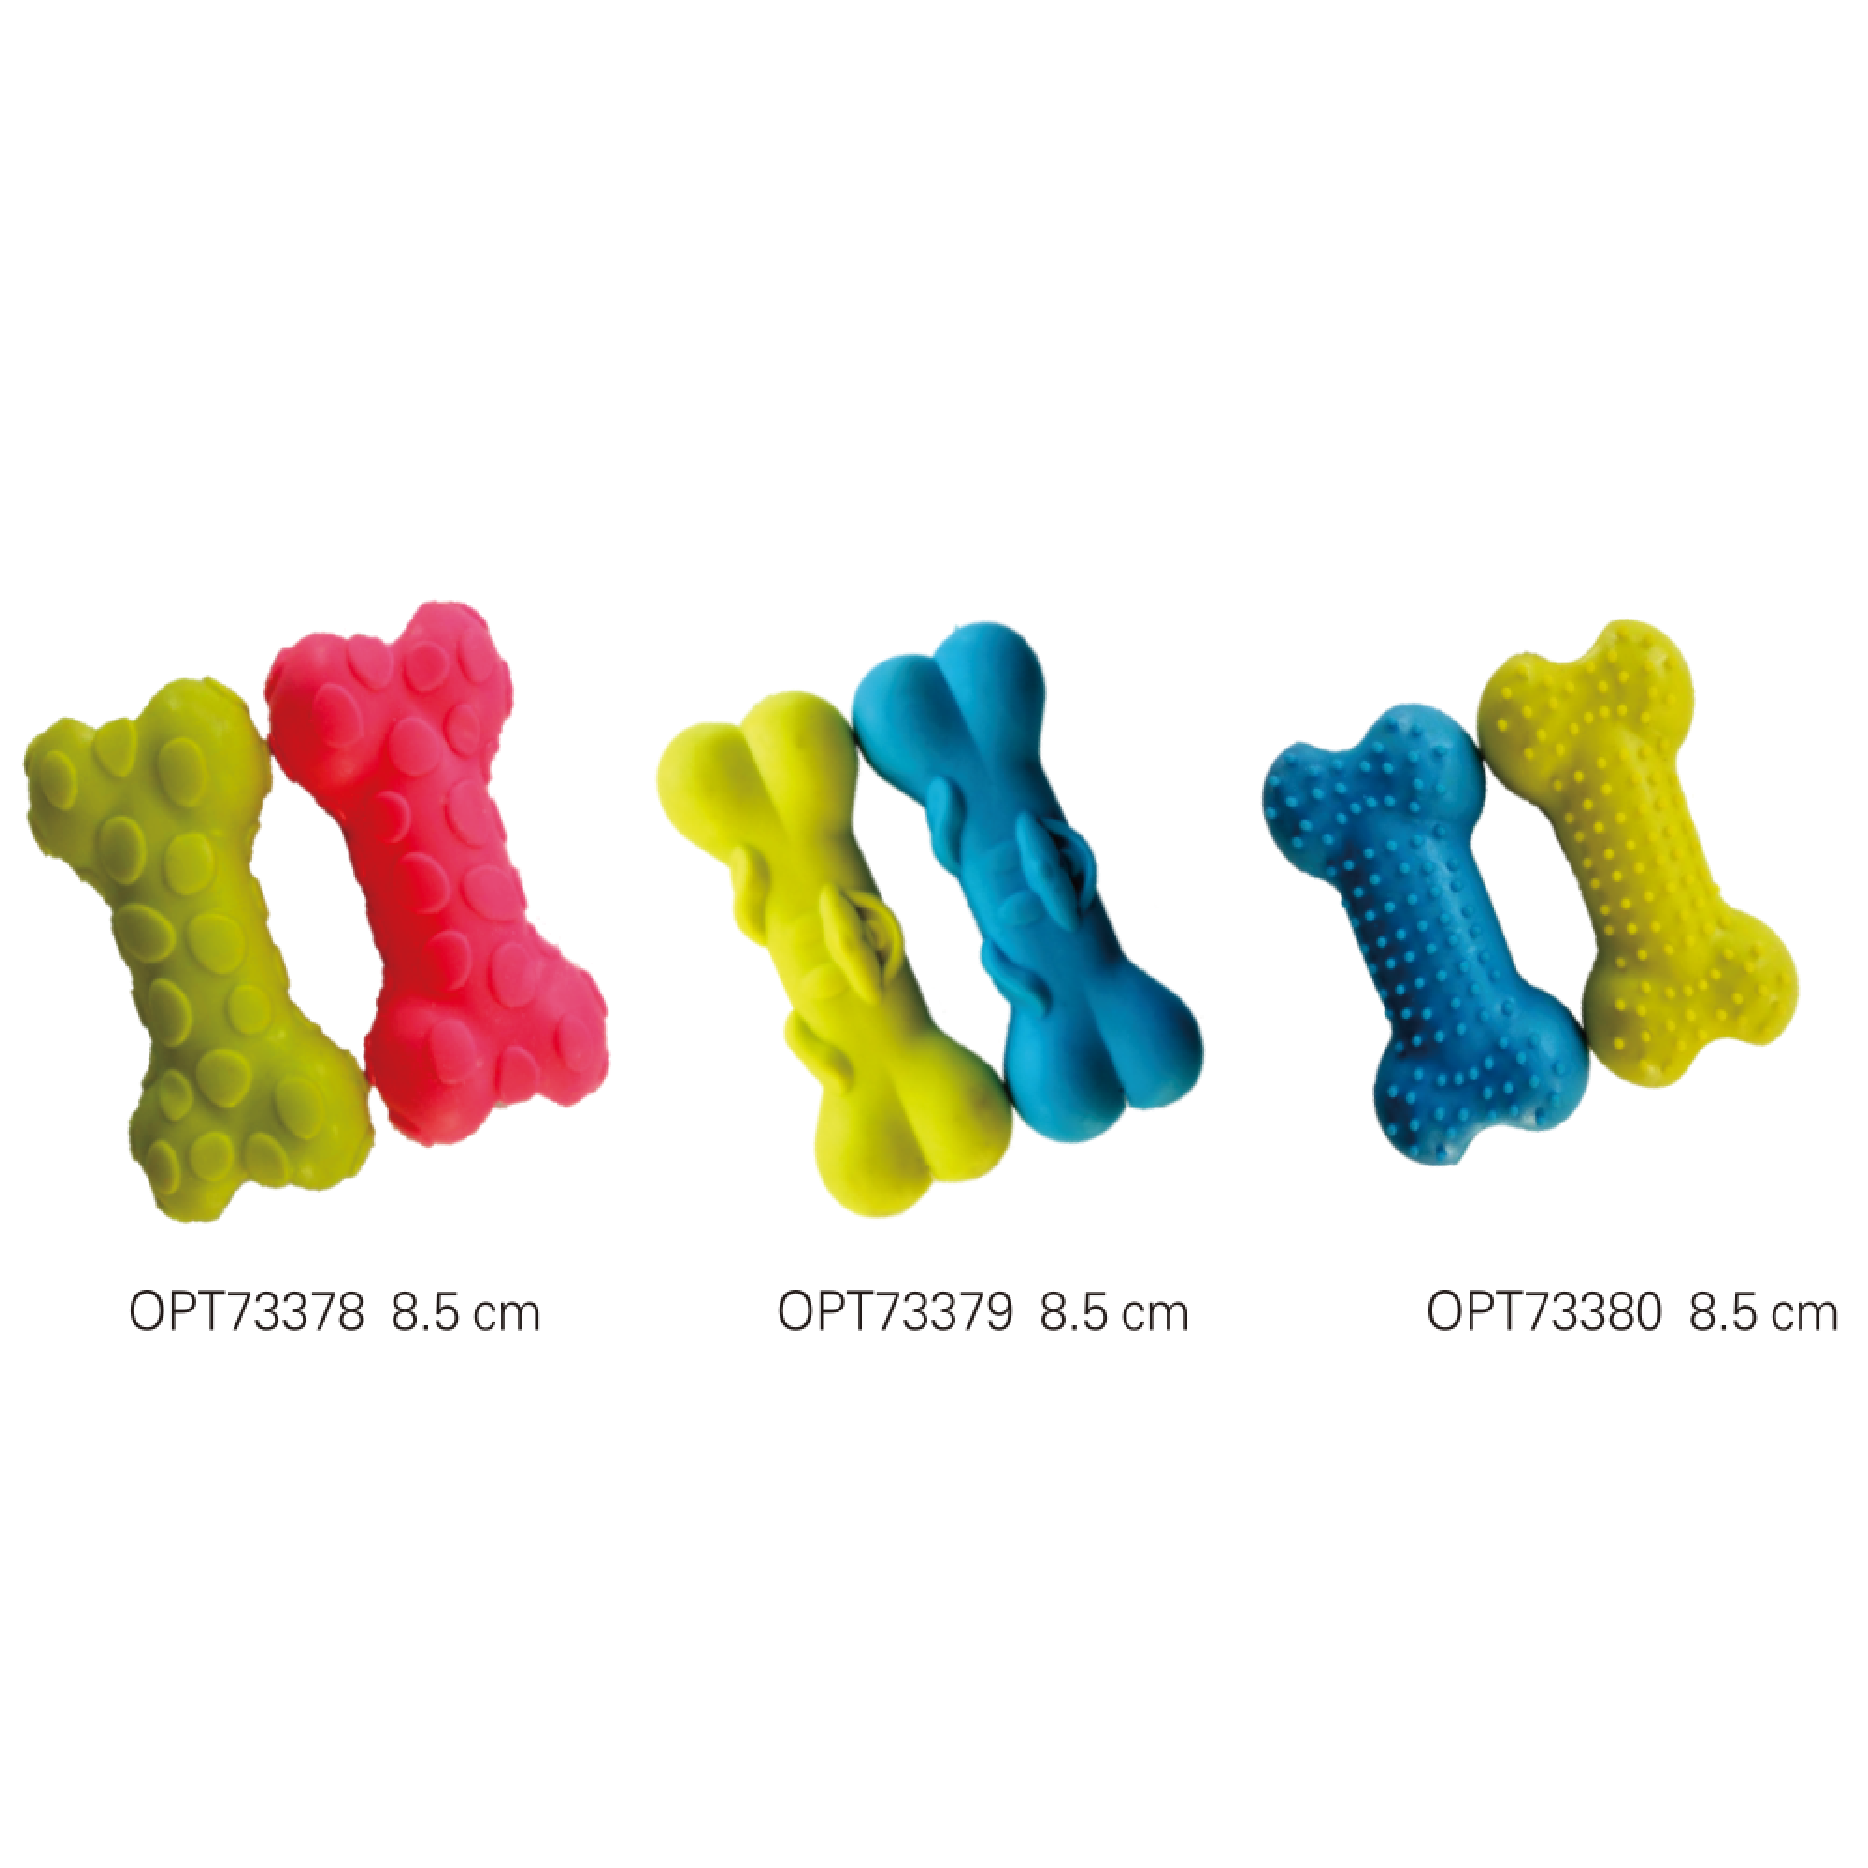 OPT73378-OPT73380 Dog toy rubber